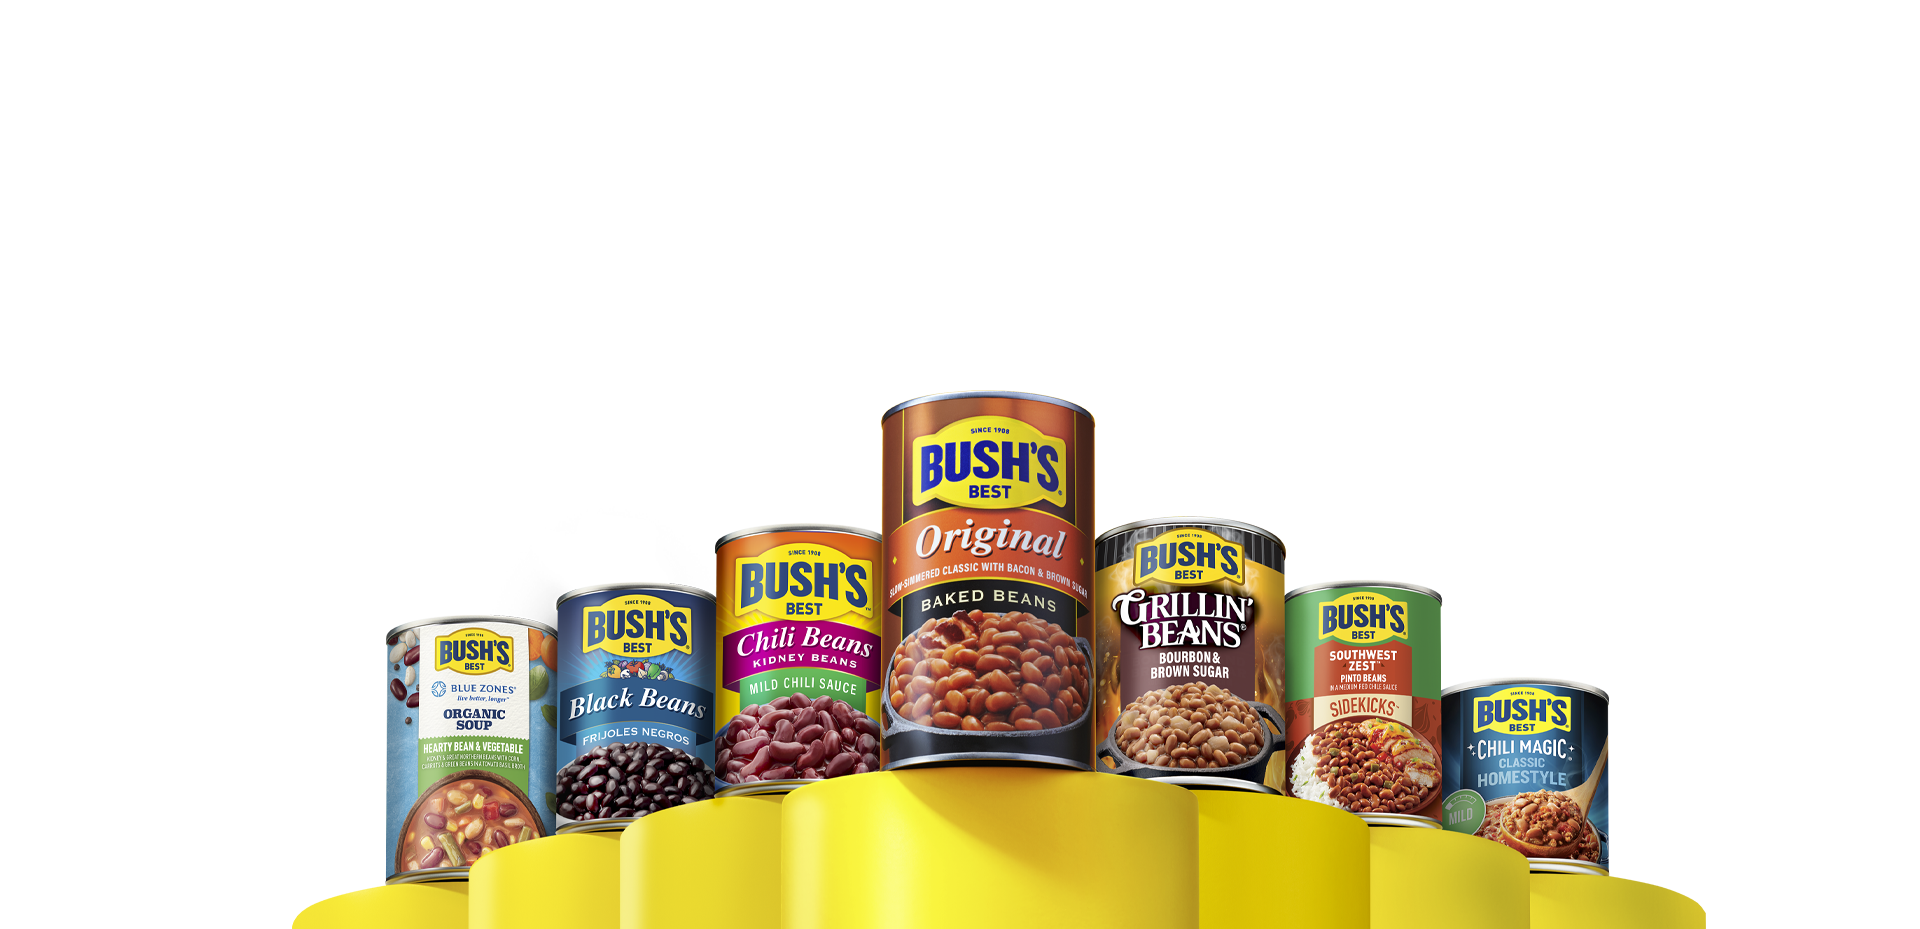 Array of Bush's Beans products on yellow pedestals